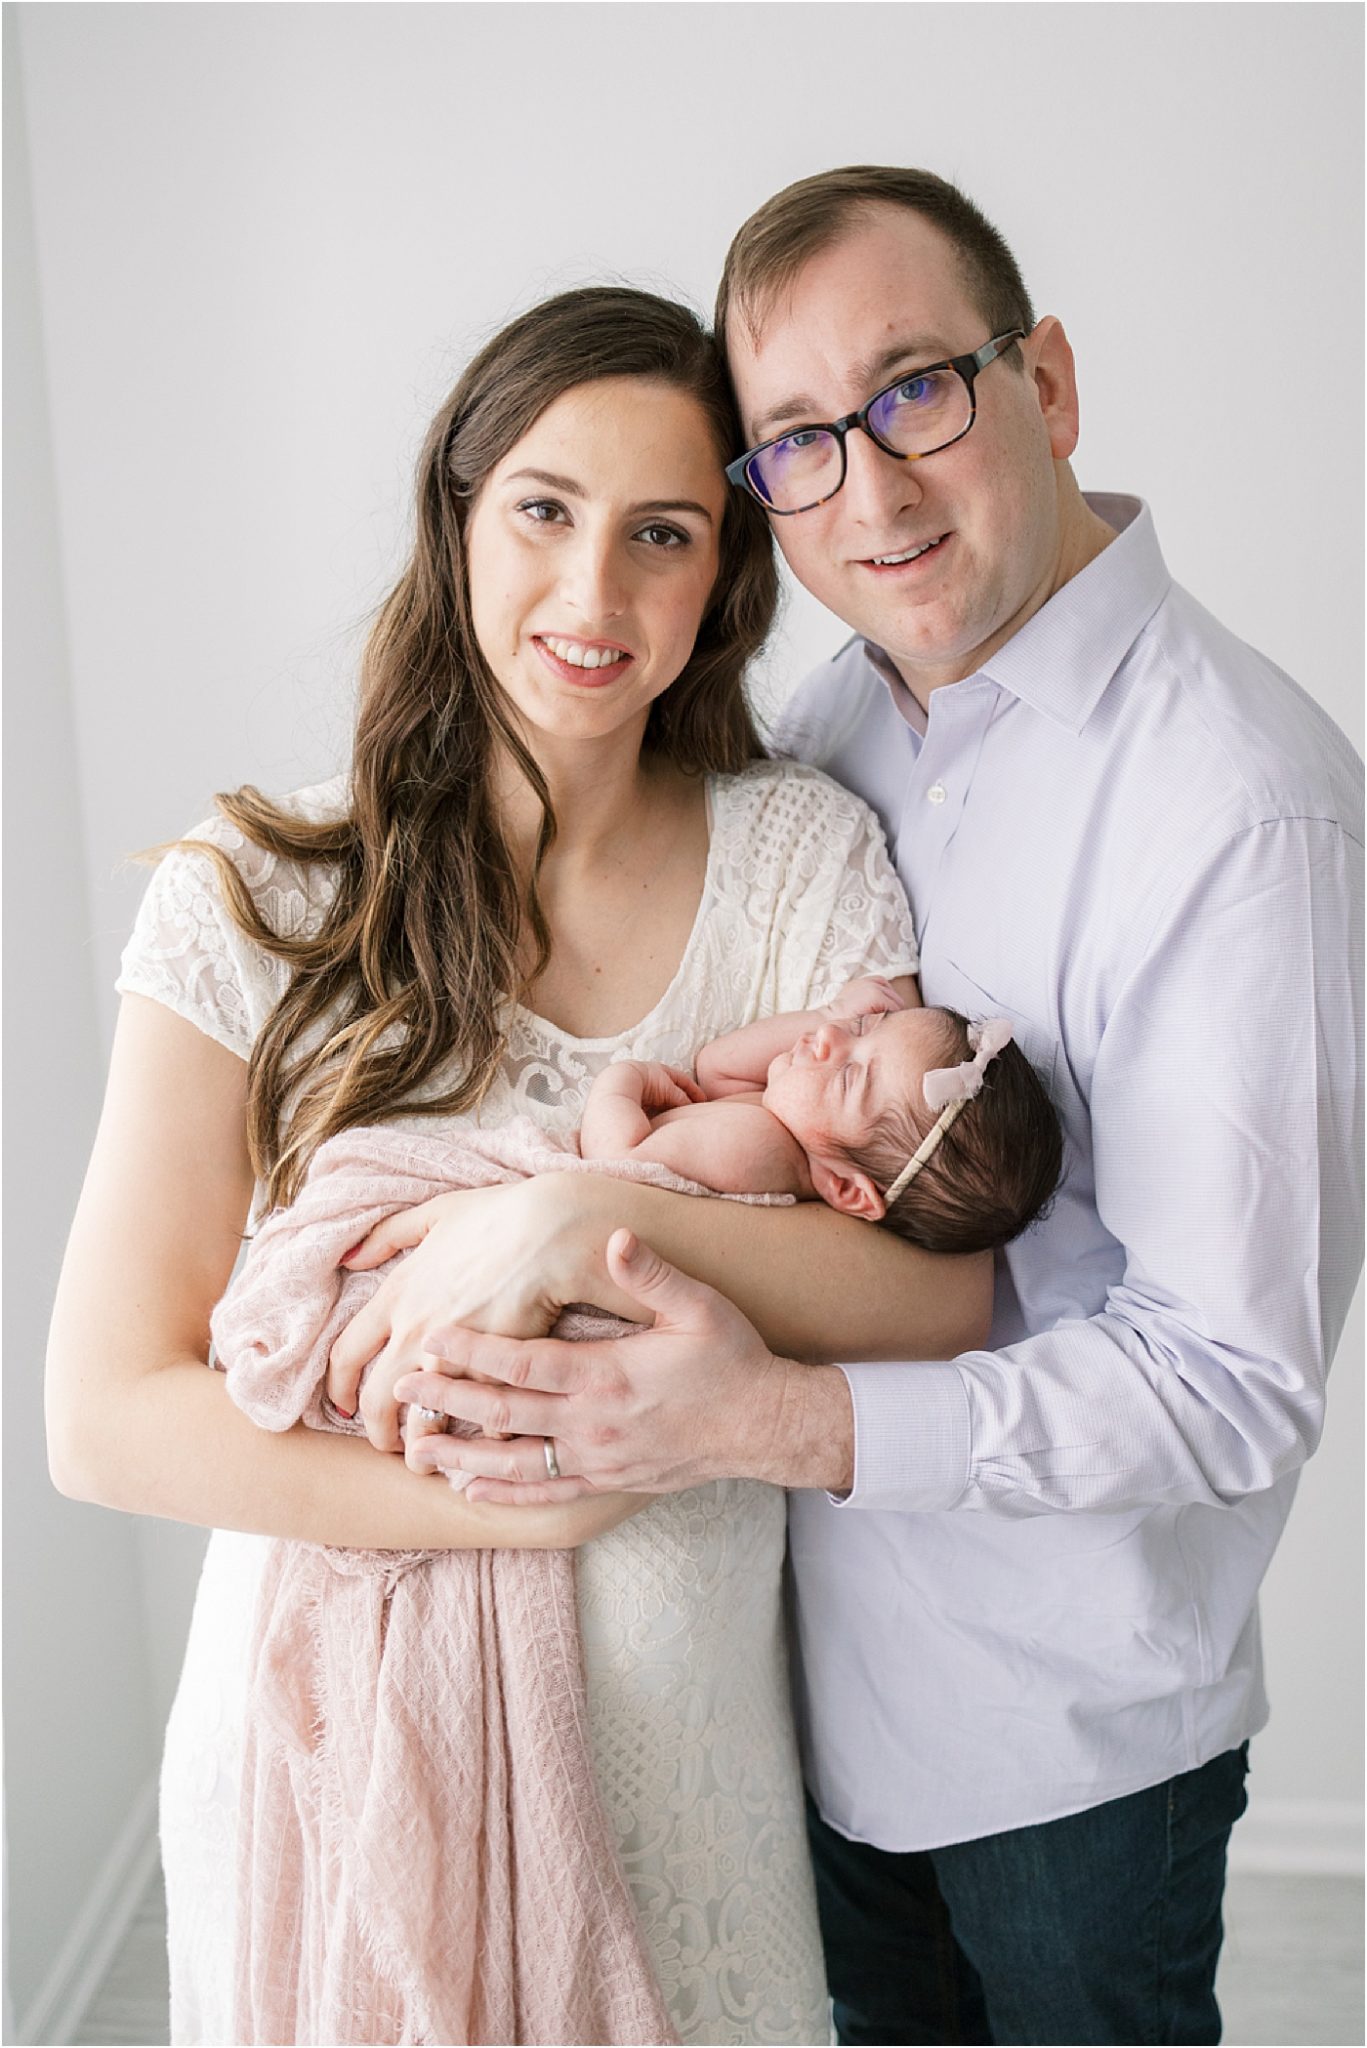 Newborn family portrait in studio in Fishers Indiana. Photos by Lindsay Konopa Photography.